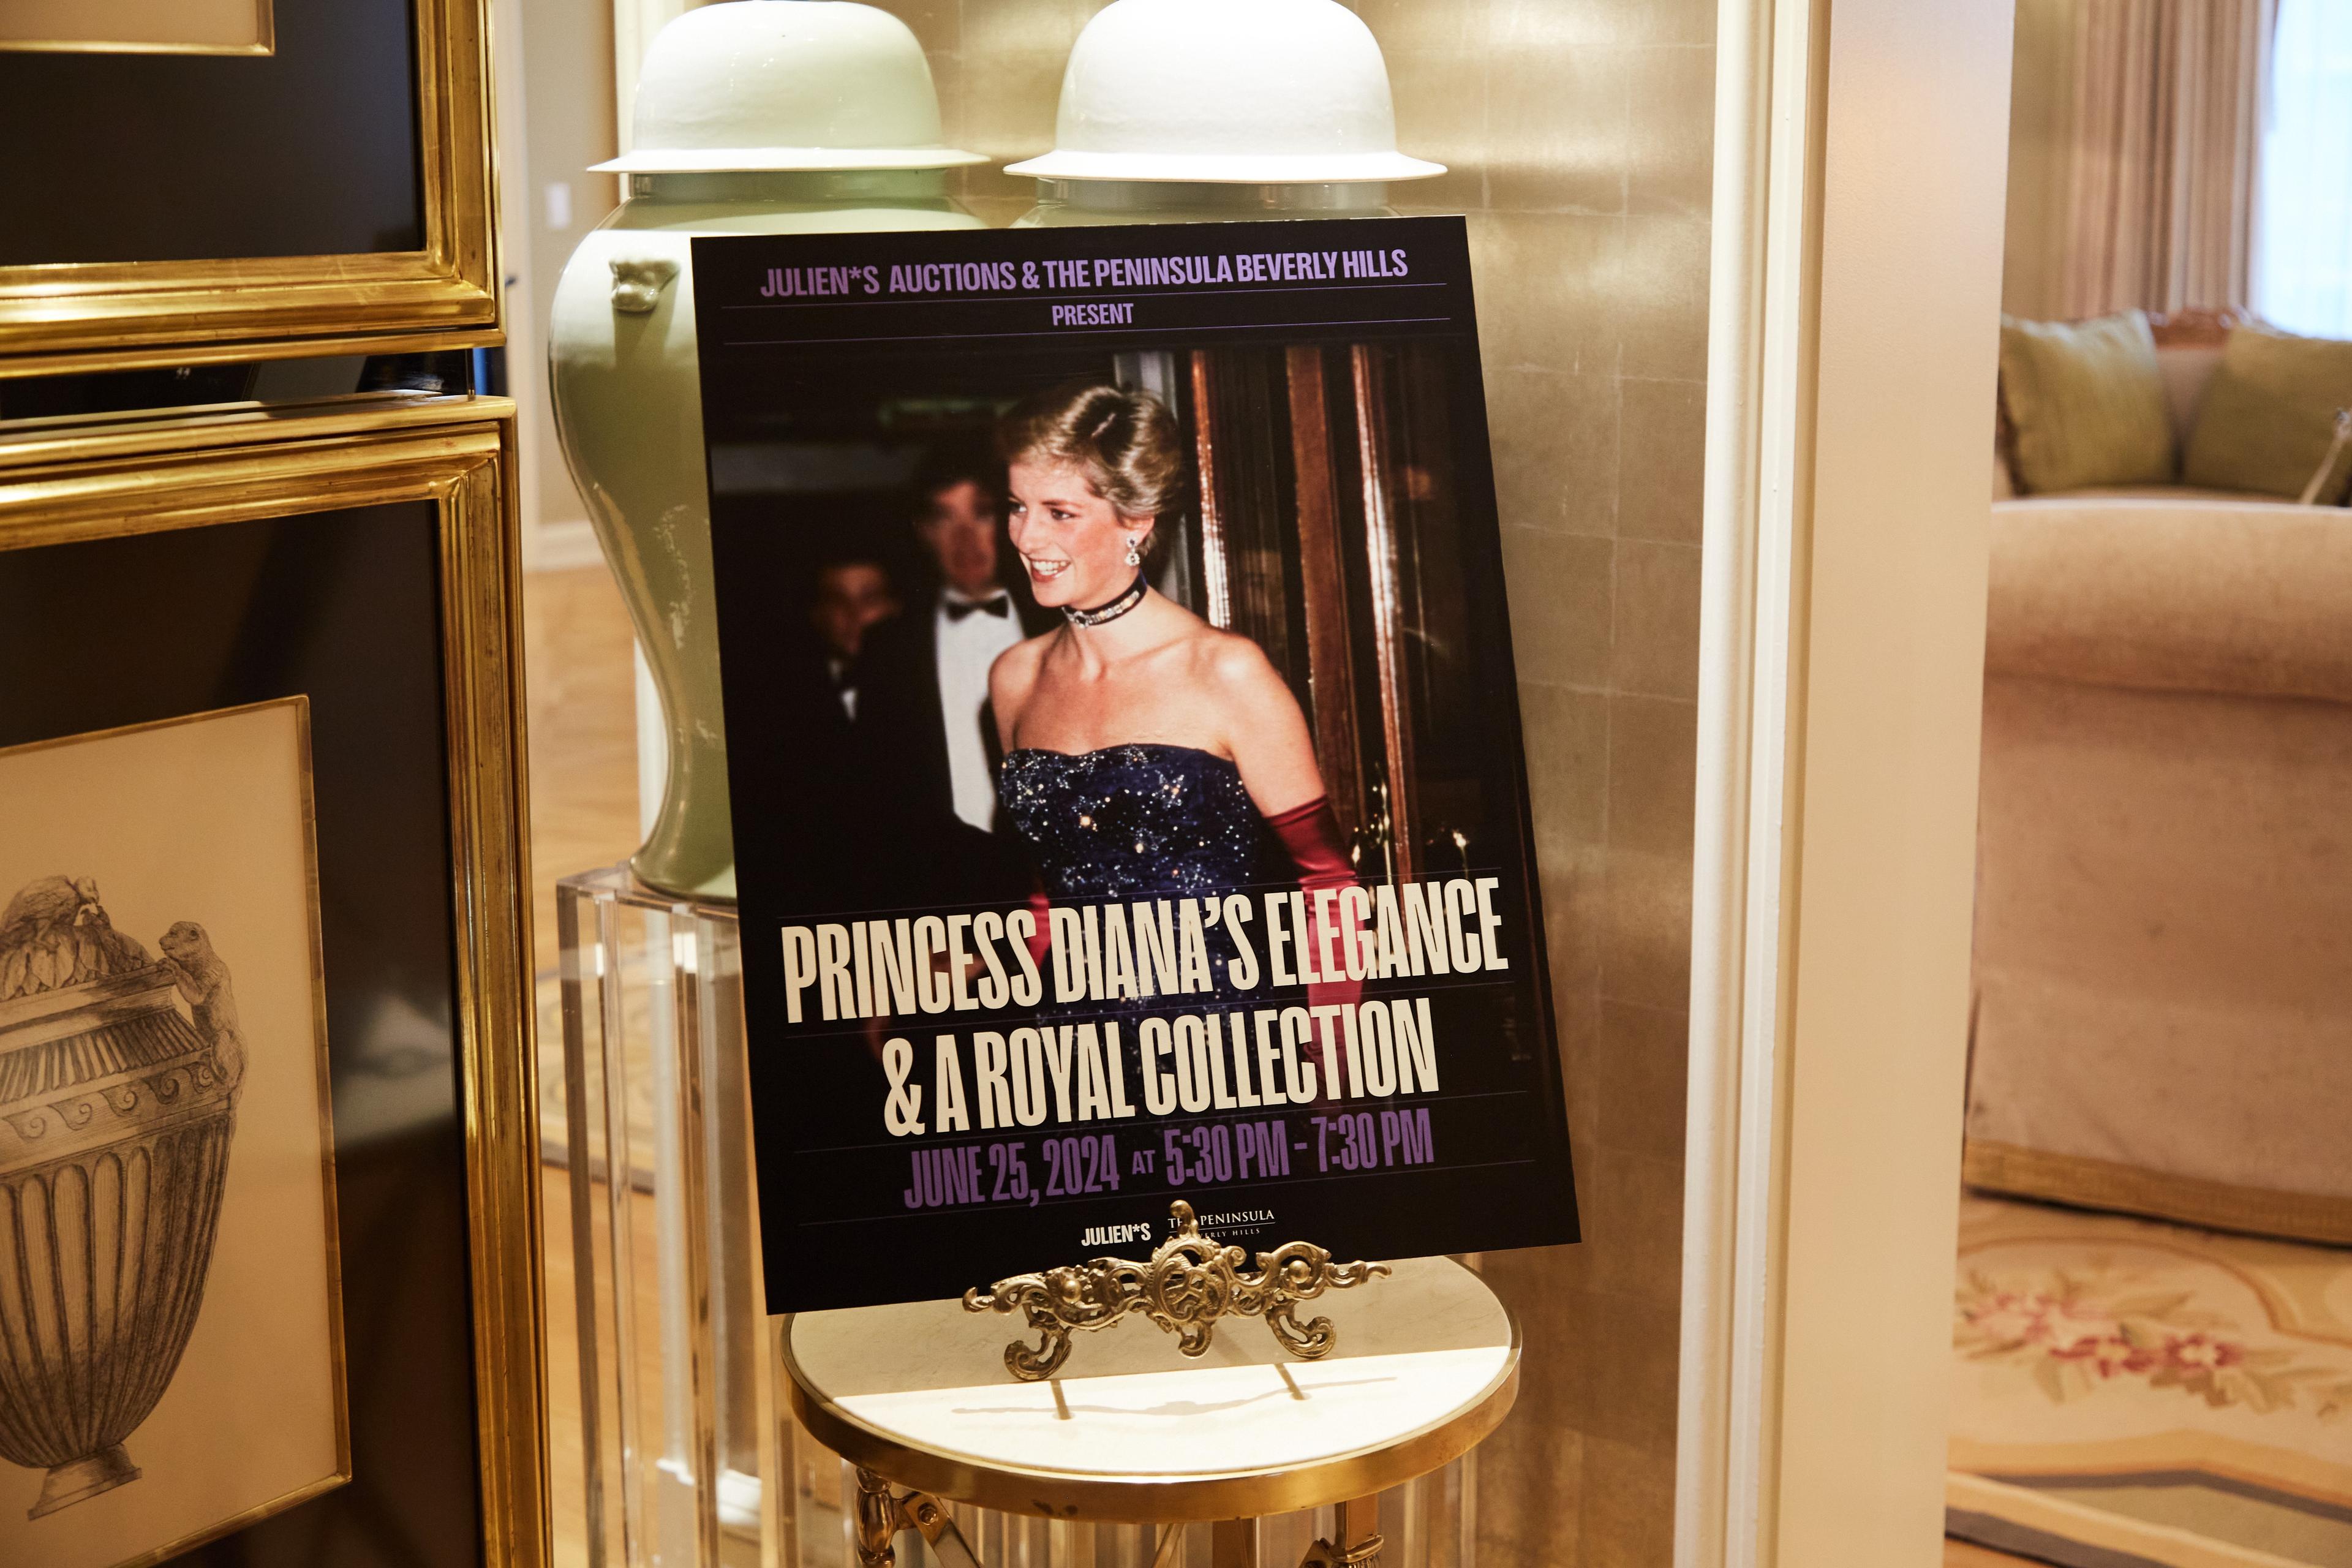 a poster of princess diana 's elegance and a royal collection is sitting on a table .